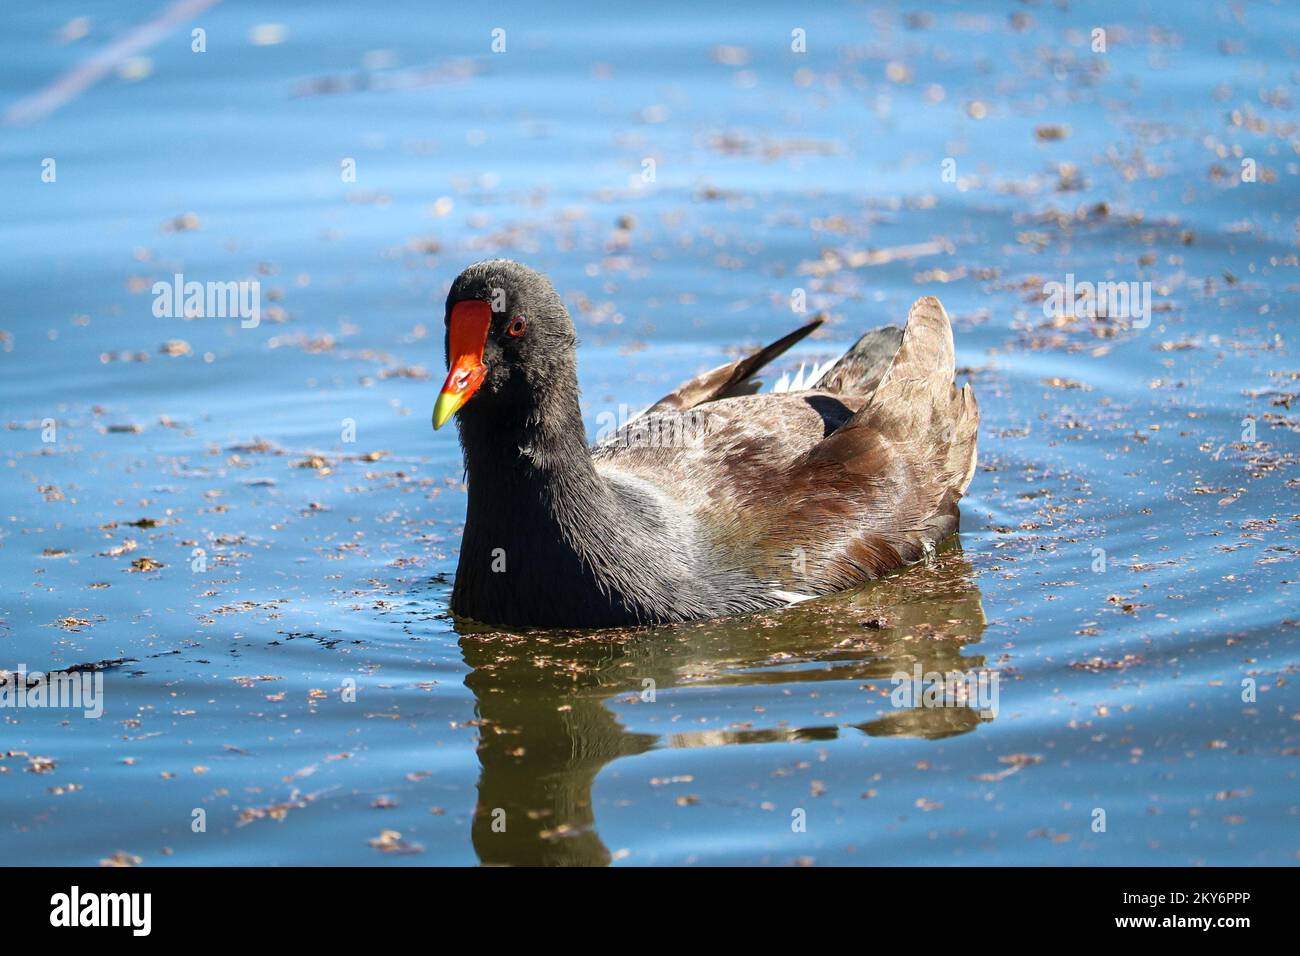 Common moorhen or Gallinula chloropus swimming in a pond at the riparian water ranch in Arizona. Stock Photo